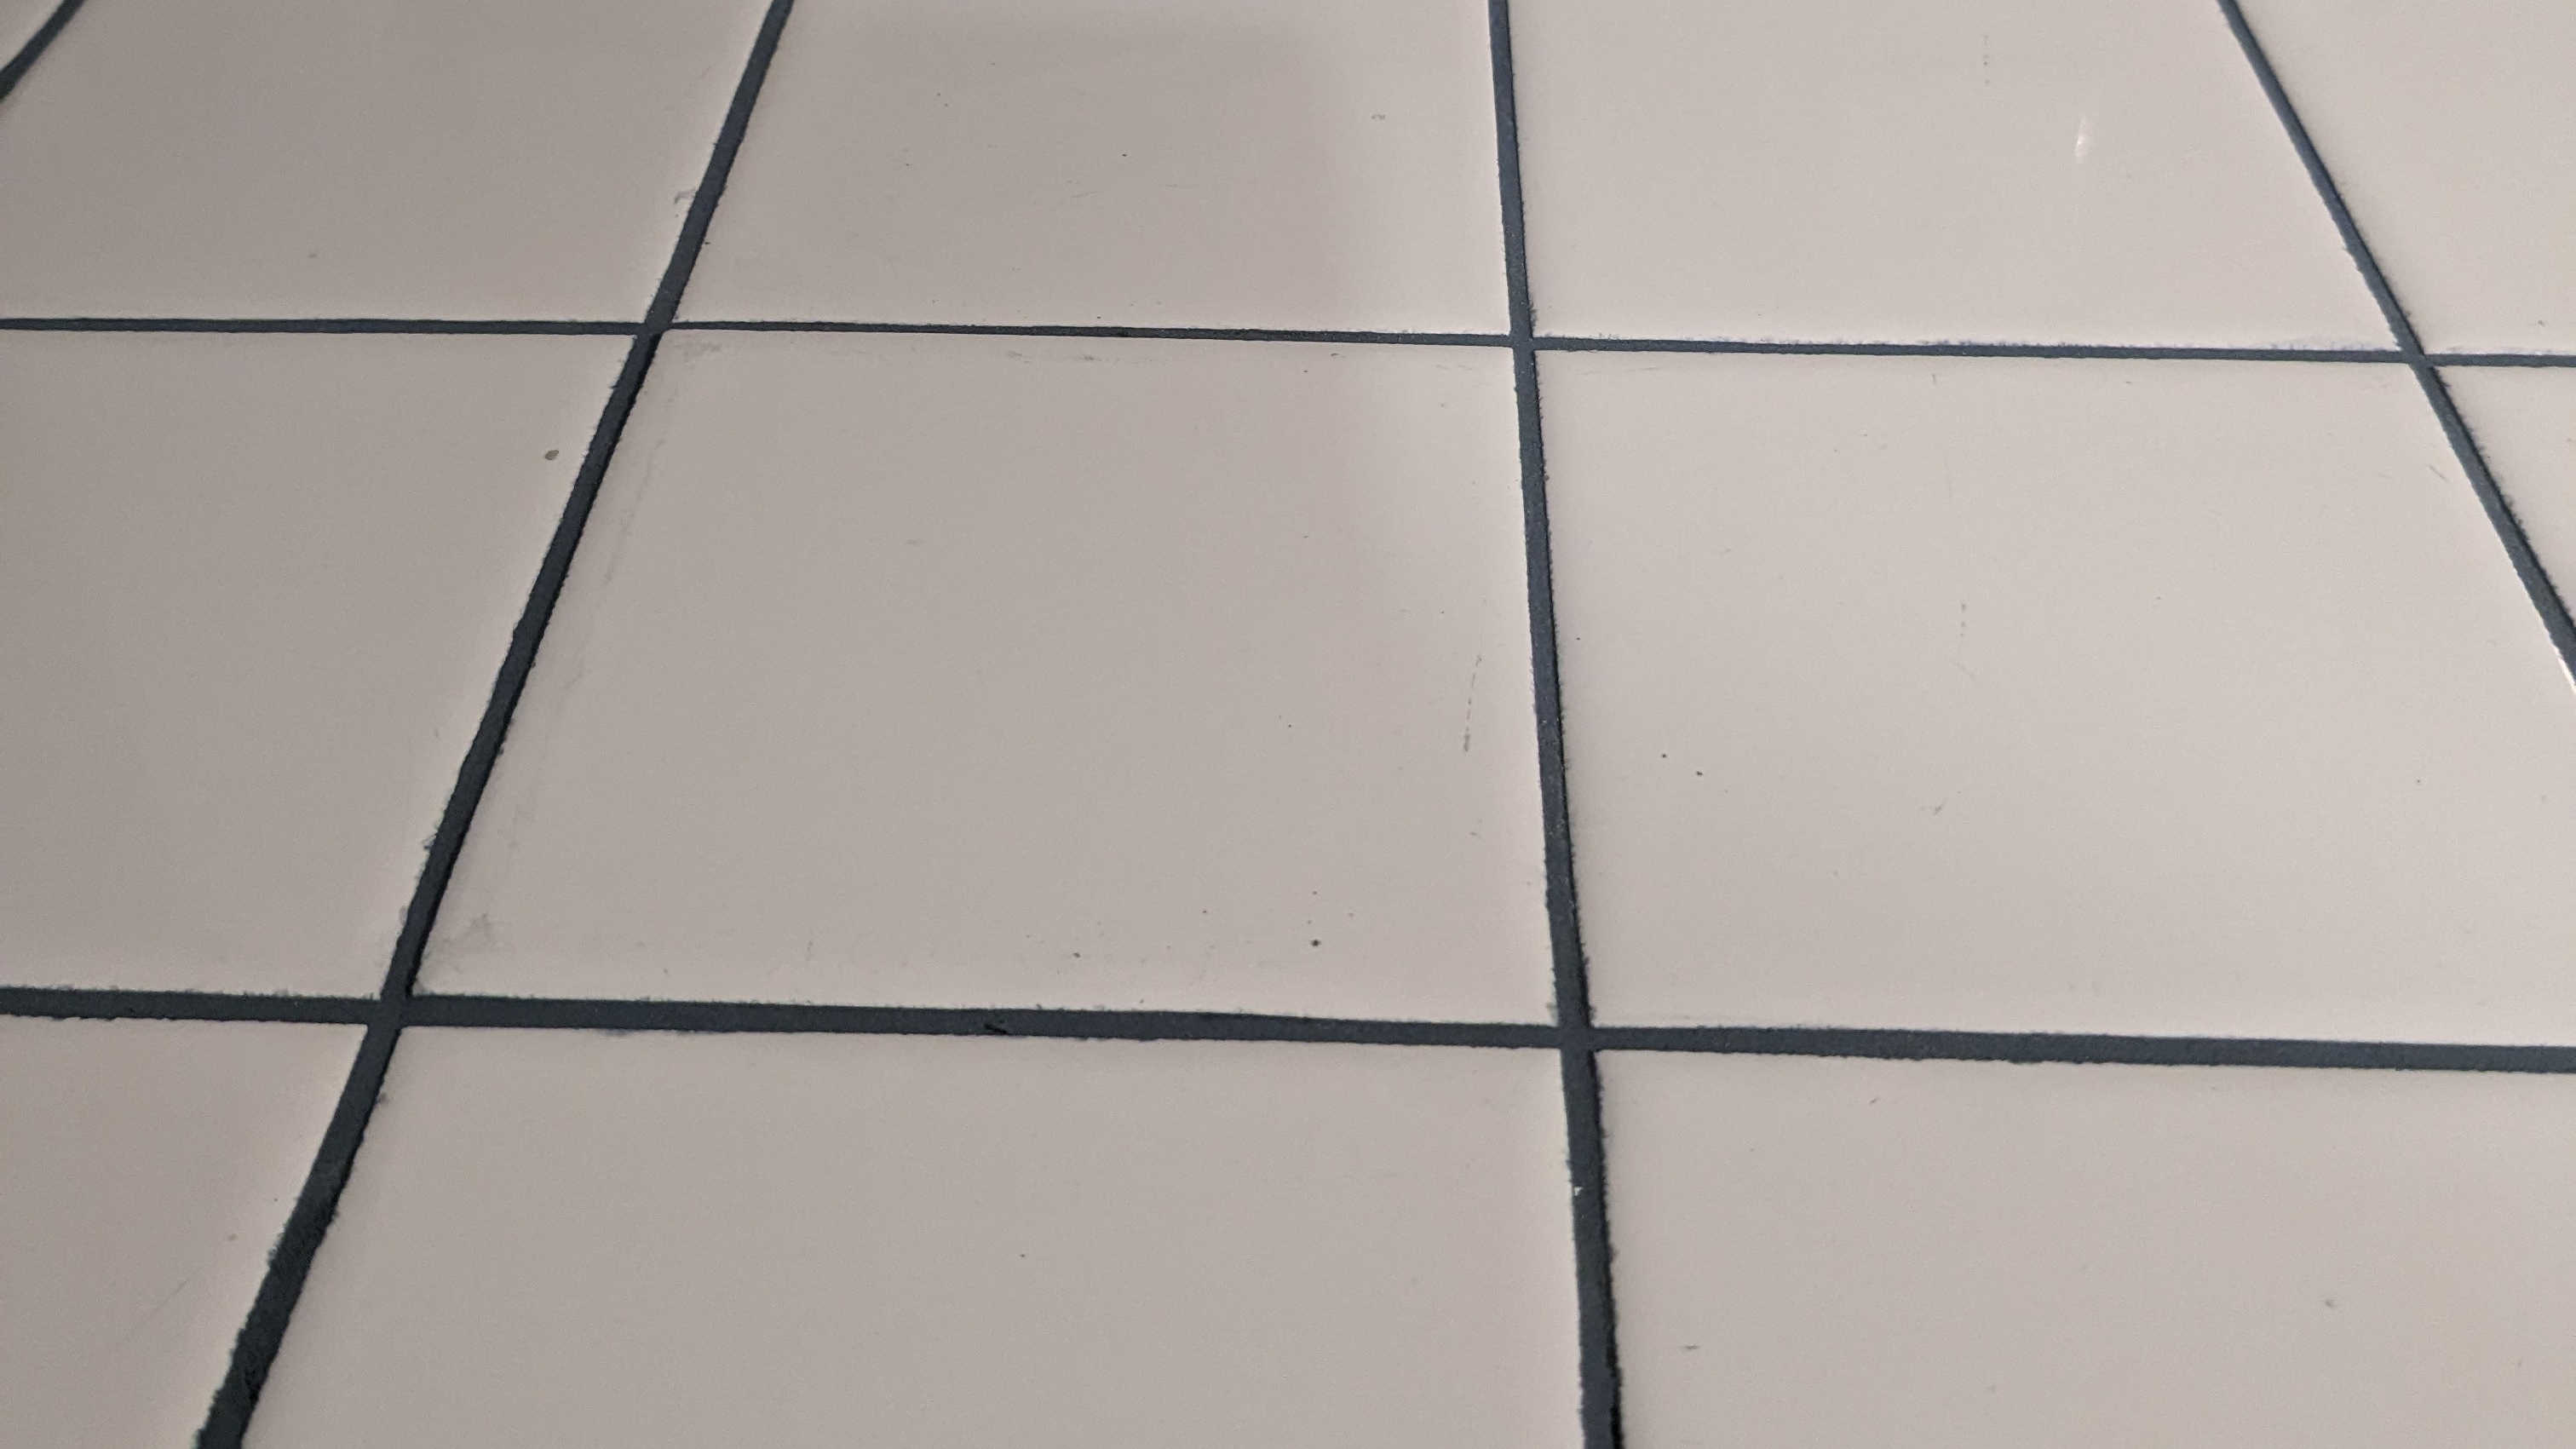 New blue grout on tiled kitchen countertops